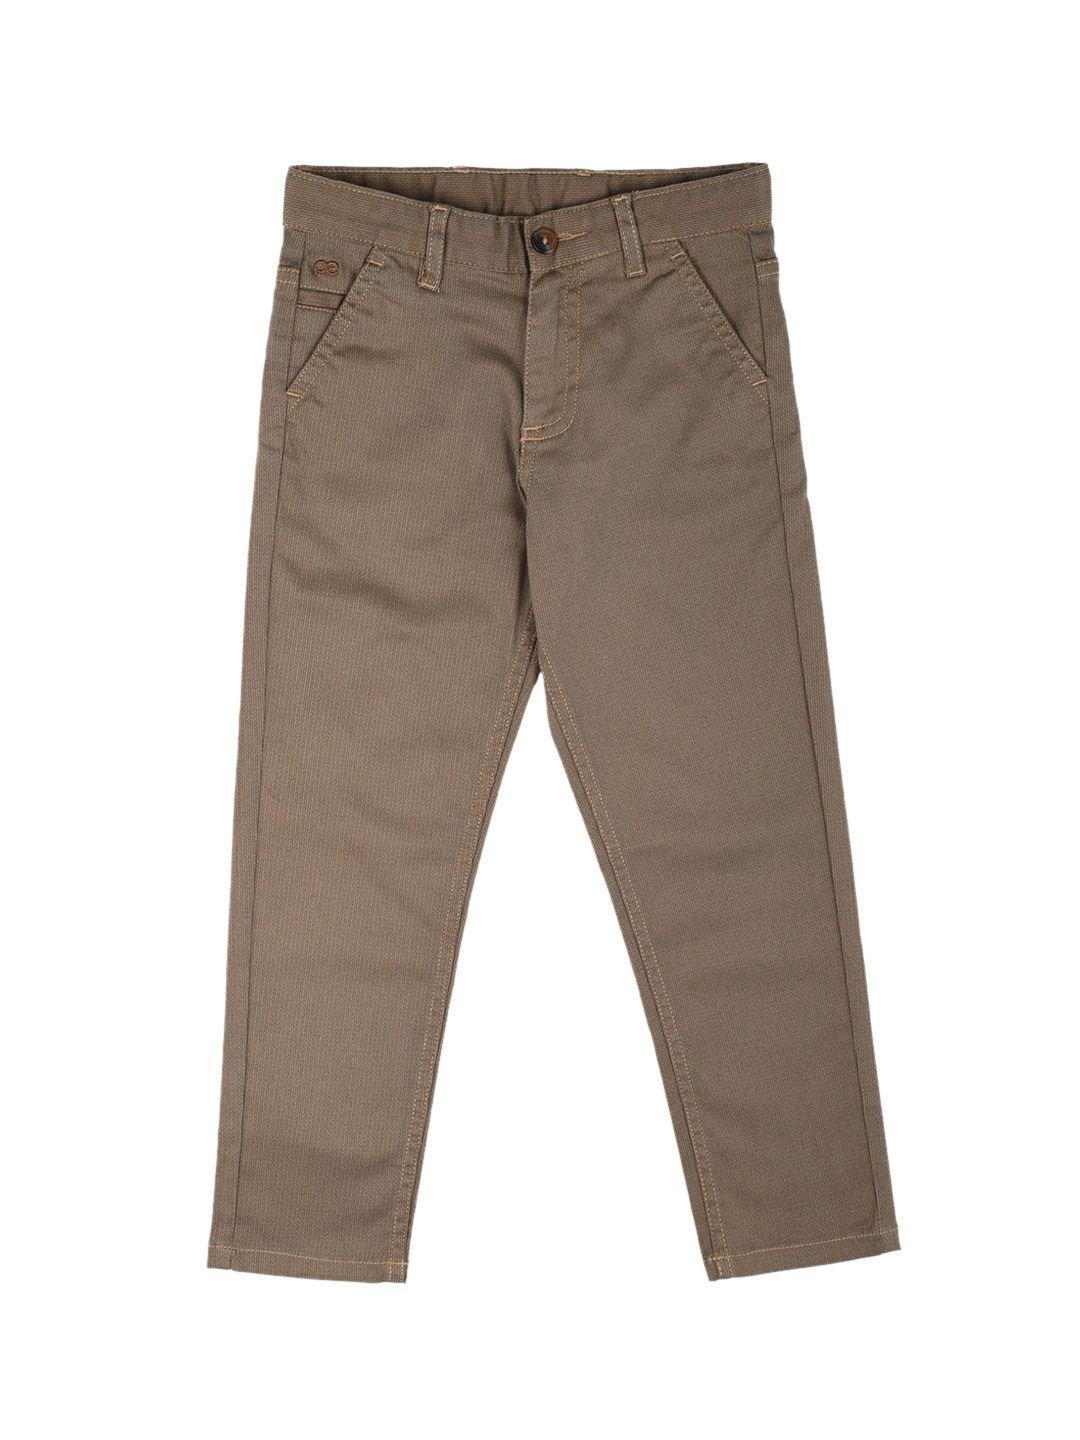 peter england boys skinny fit trousers